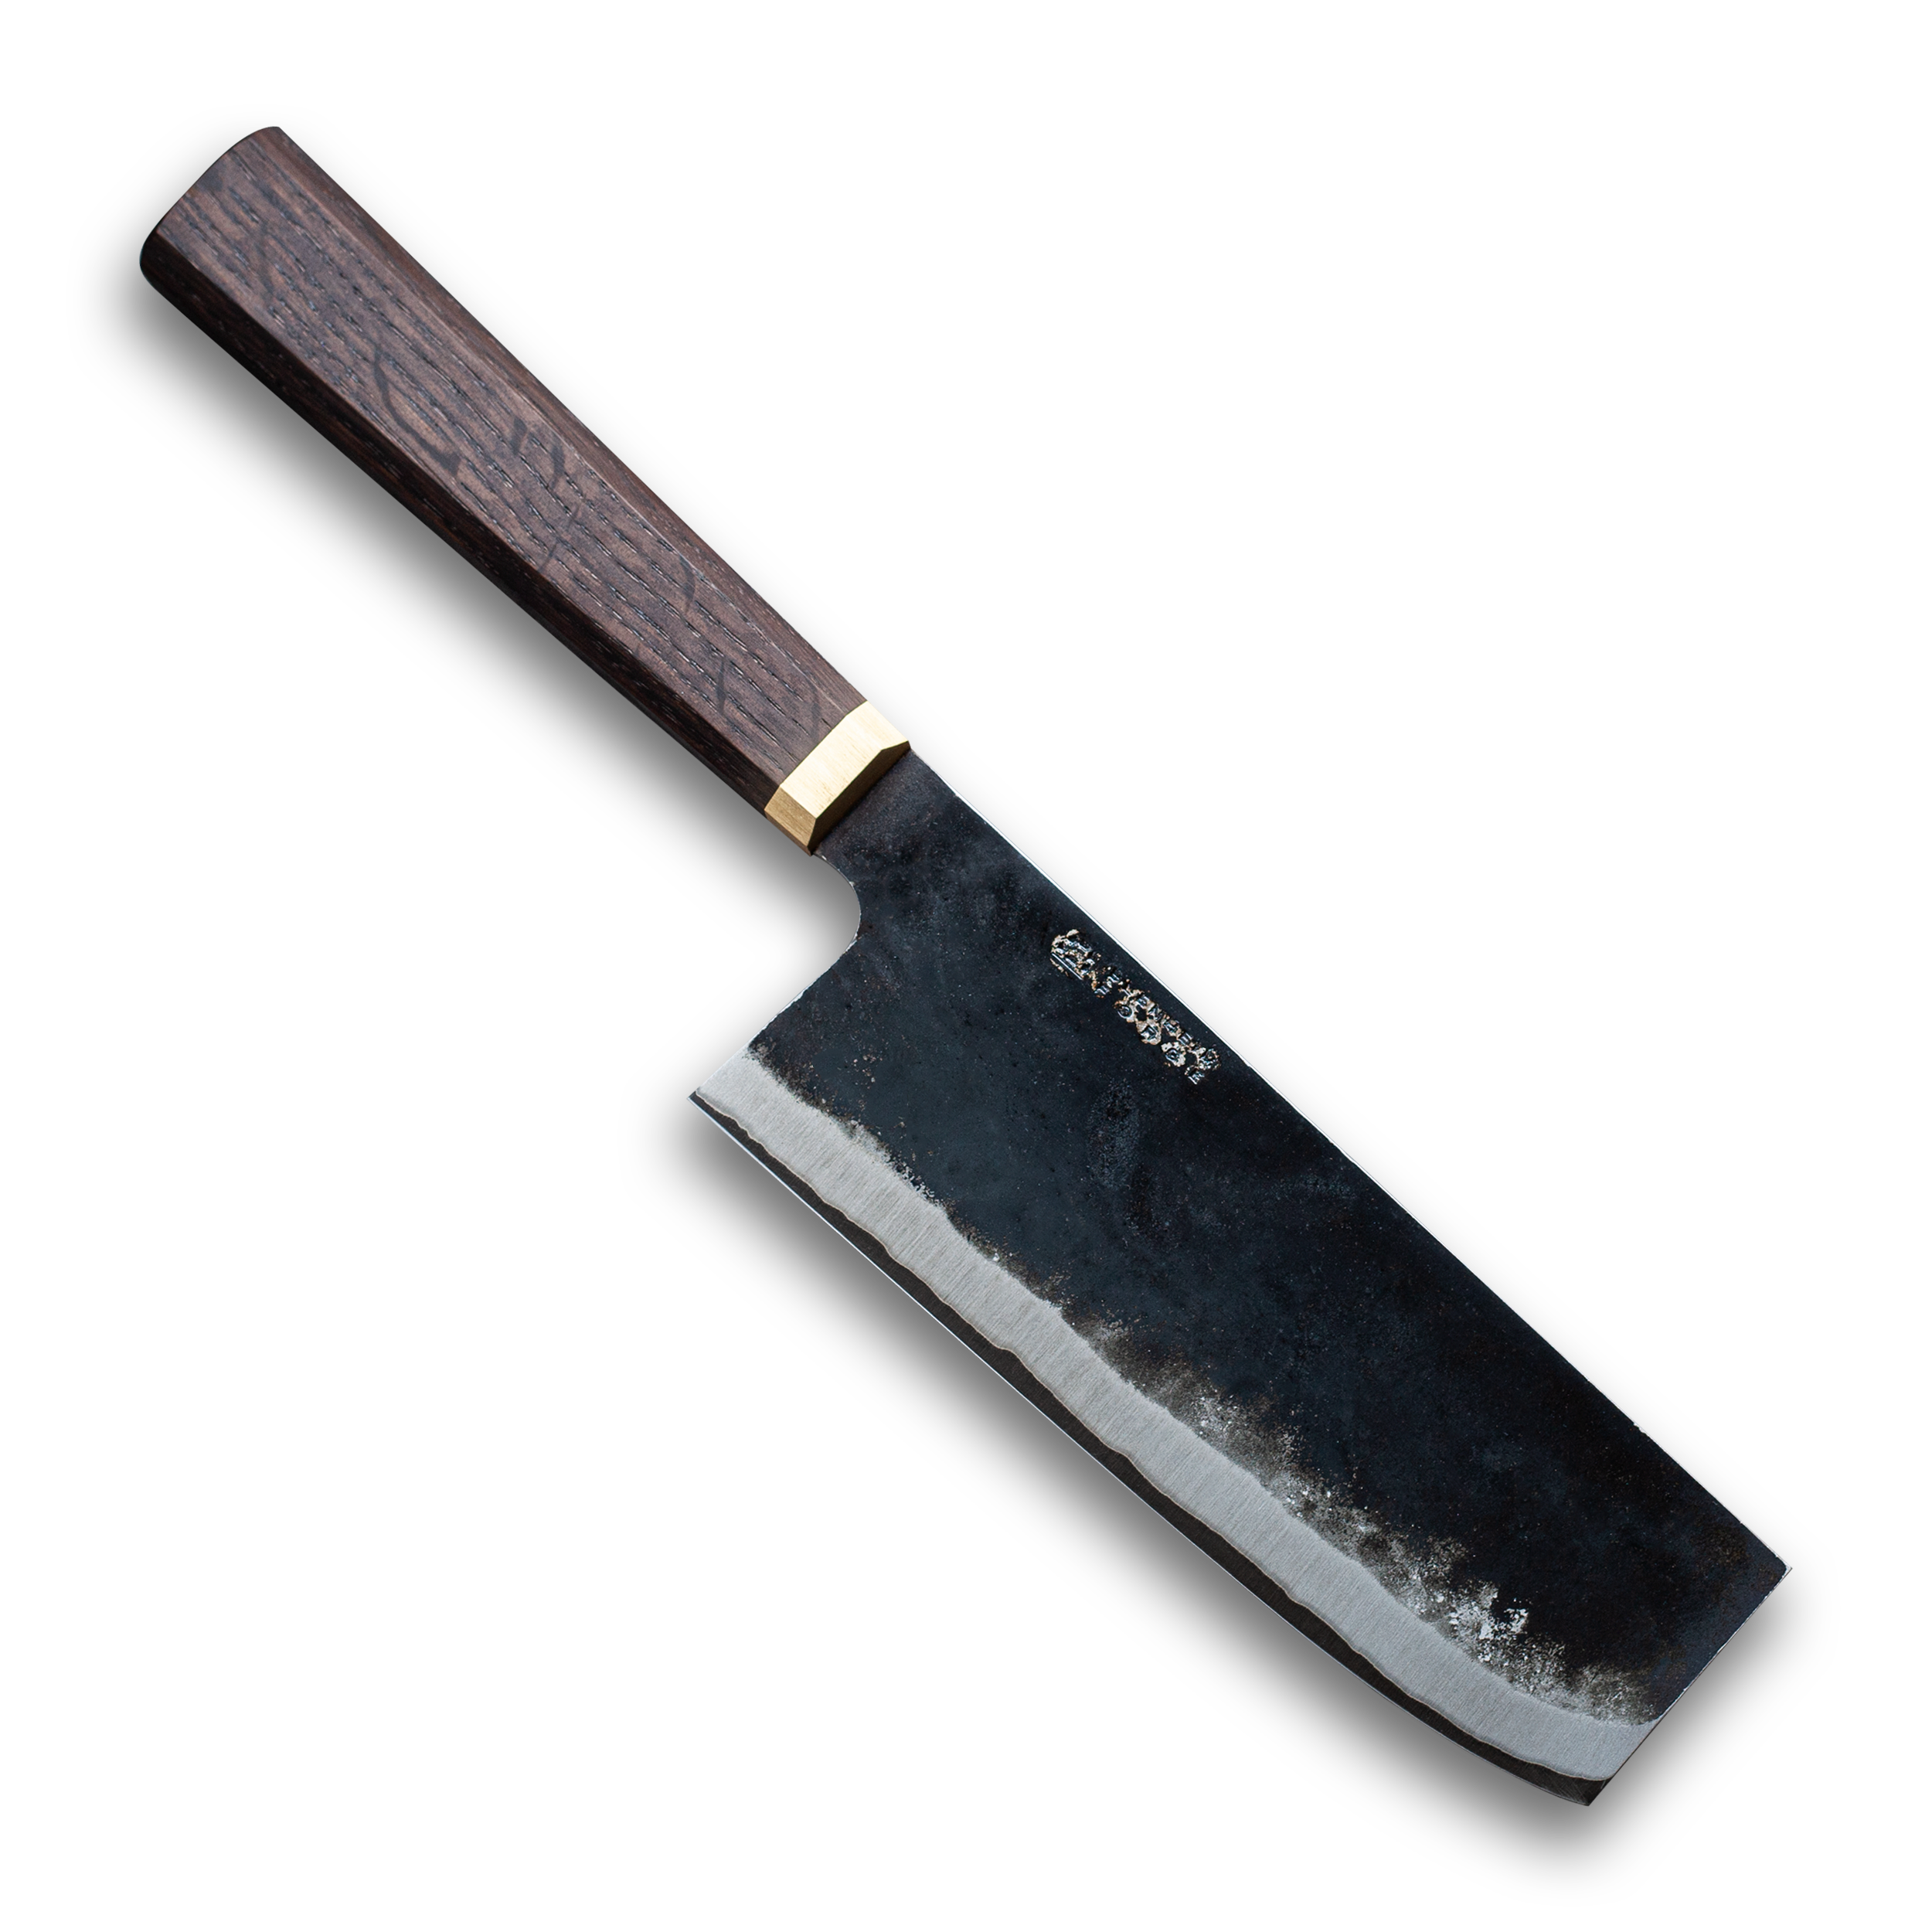 Wooden Handle Knife Stainless Steel Polished Sharp Blade Providing for Fine  Detailing, Accuracy and Efficiency, Knife 9R 